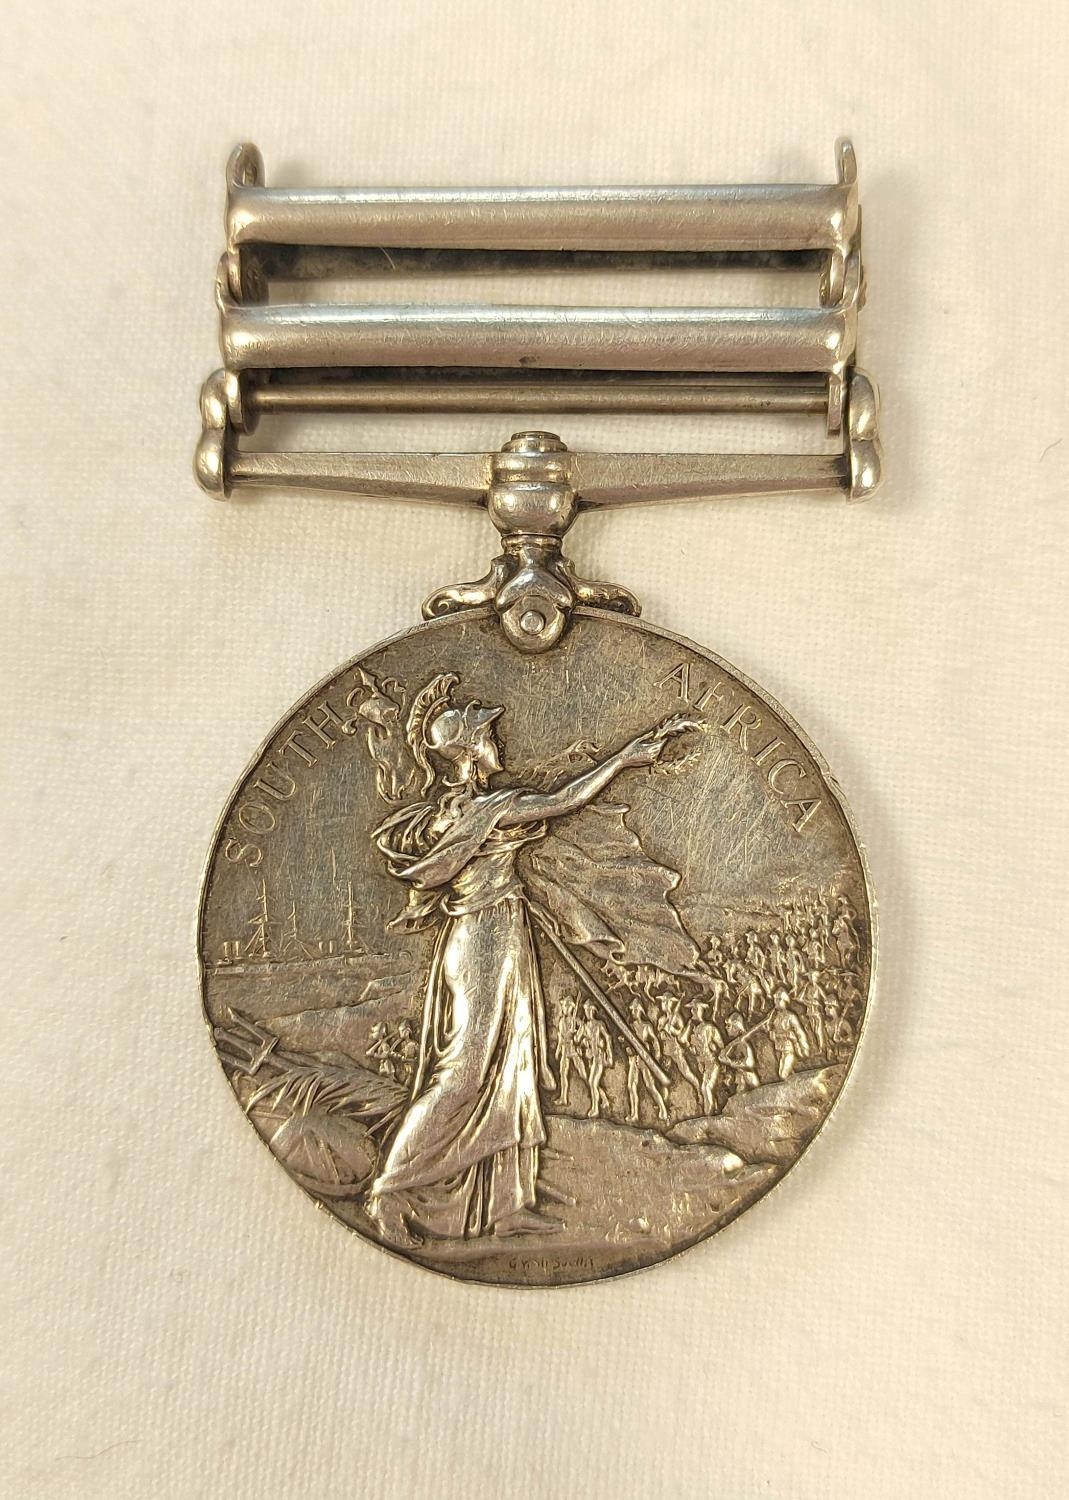 1902 King's South Africa Medal awarded to C.Sutherland (re-engraved) 2nd Battalion King's Own - Image 2 of 4